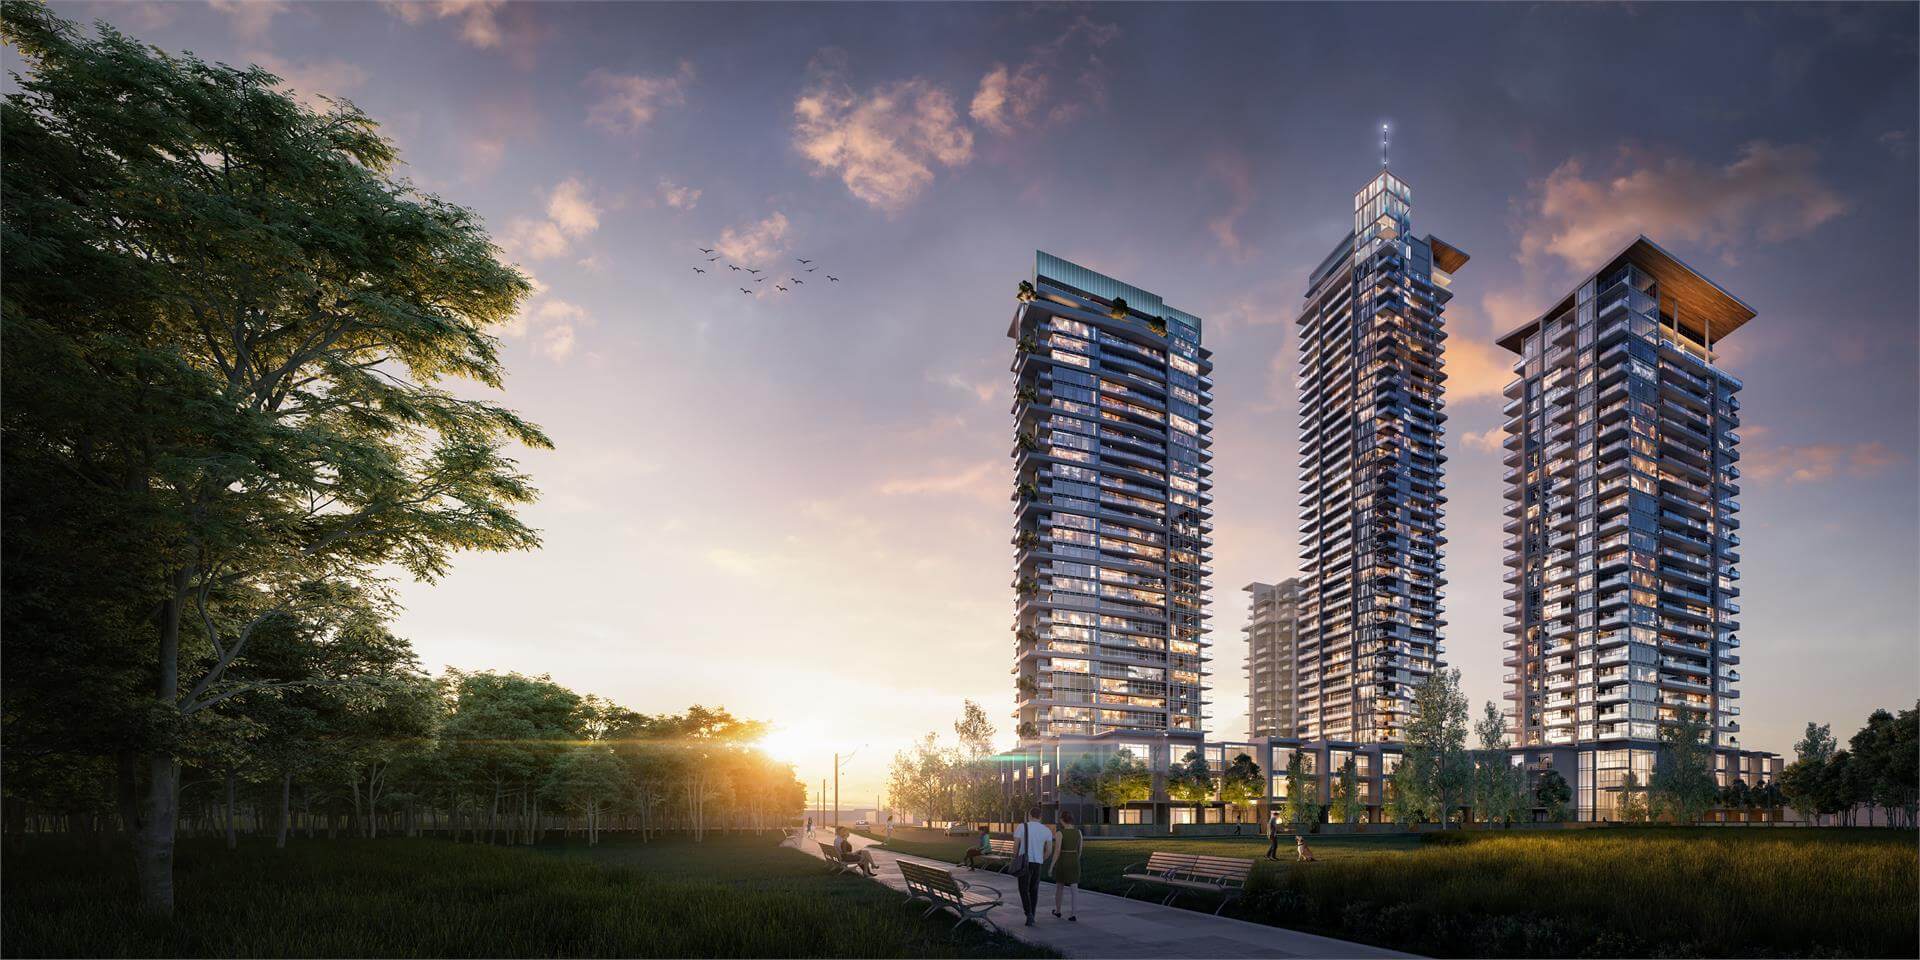 Rendering of 4 towers at Lumina Brentwood by Thind Properties